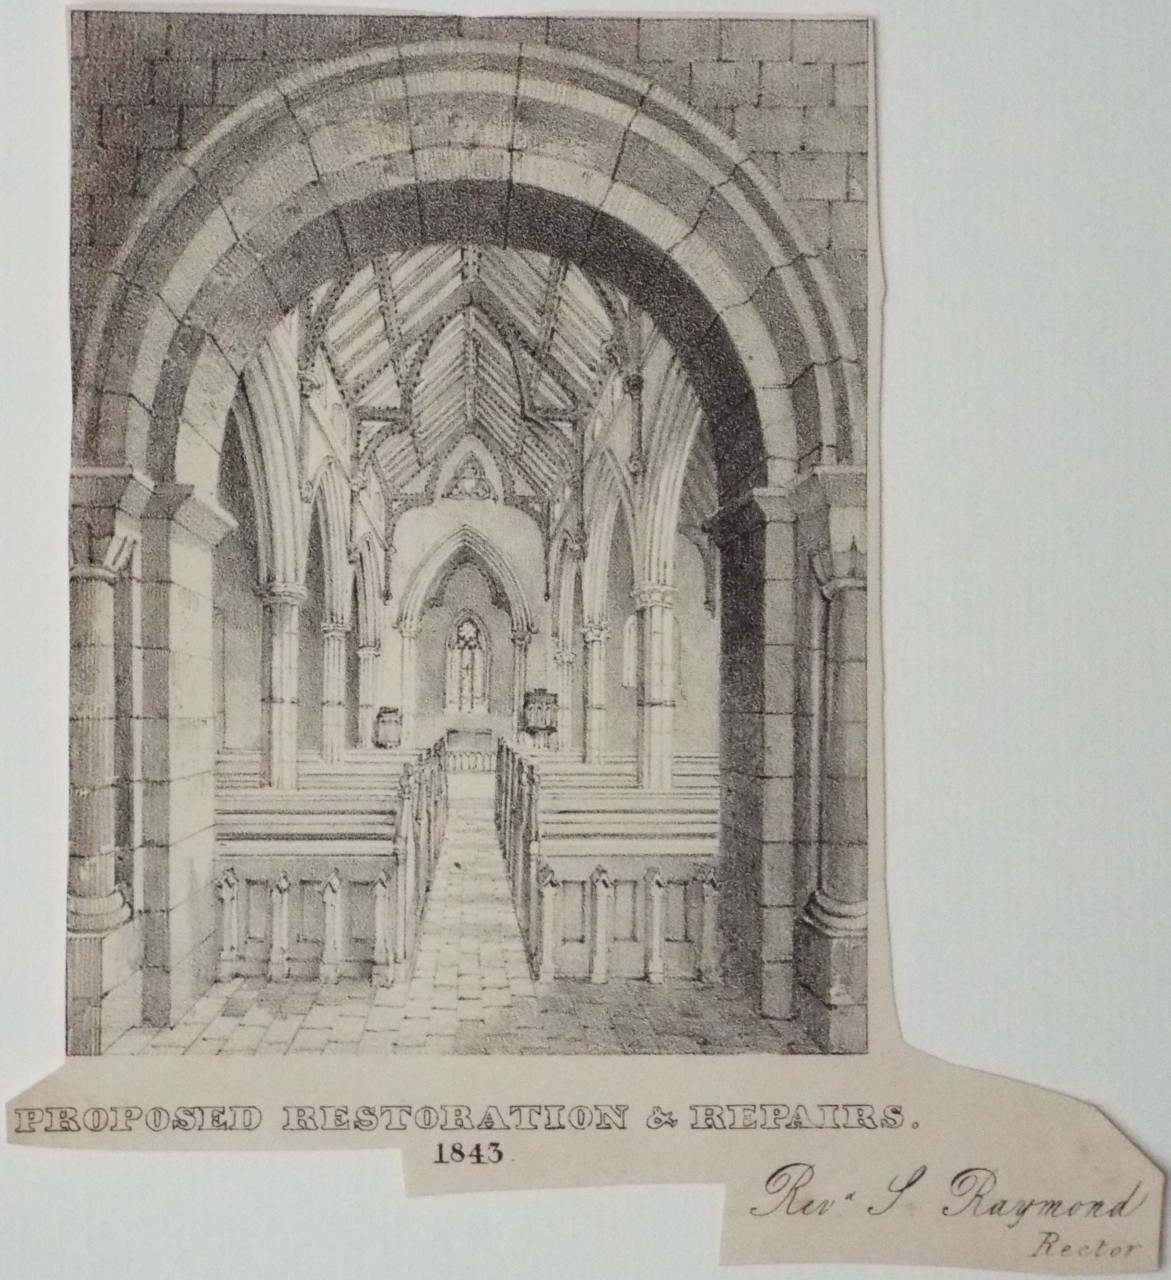 Lithograph - Proposed Restoration & Repairs, 1843 Rev. S. Raymond Rector